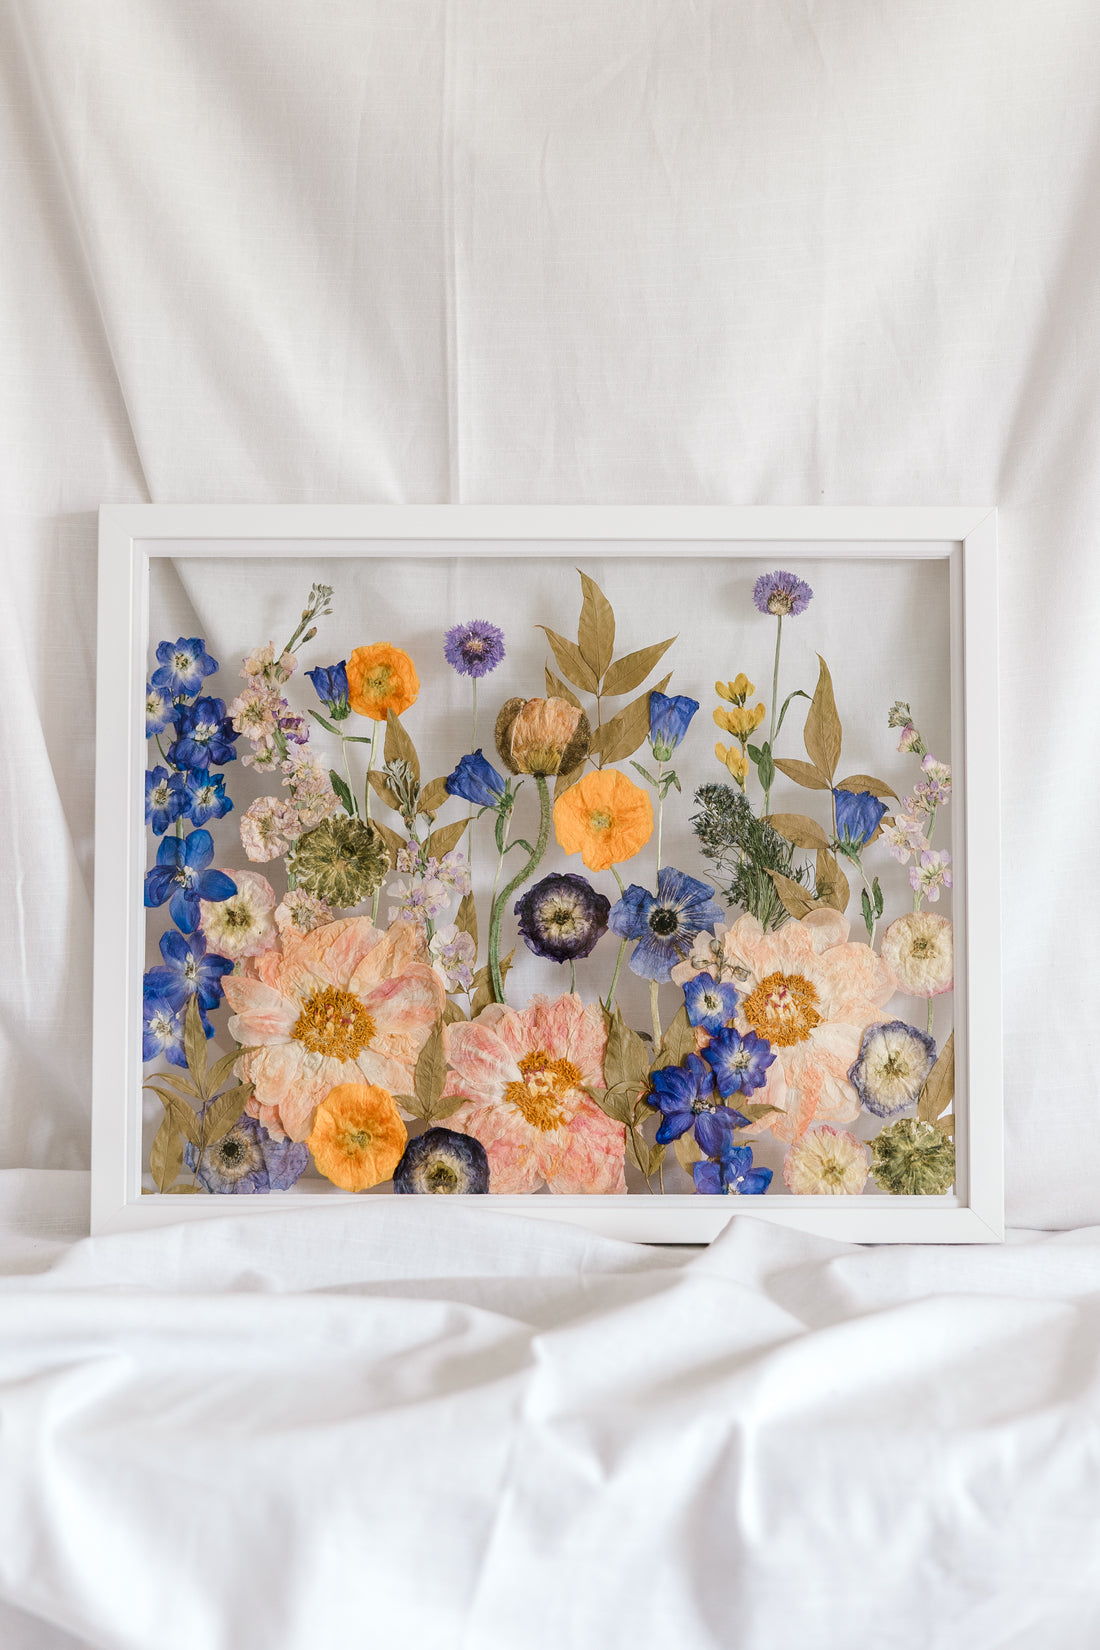 A colorful wedding bouquet turned into a colorful pressed flower display inside a white wood frame.